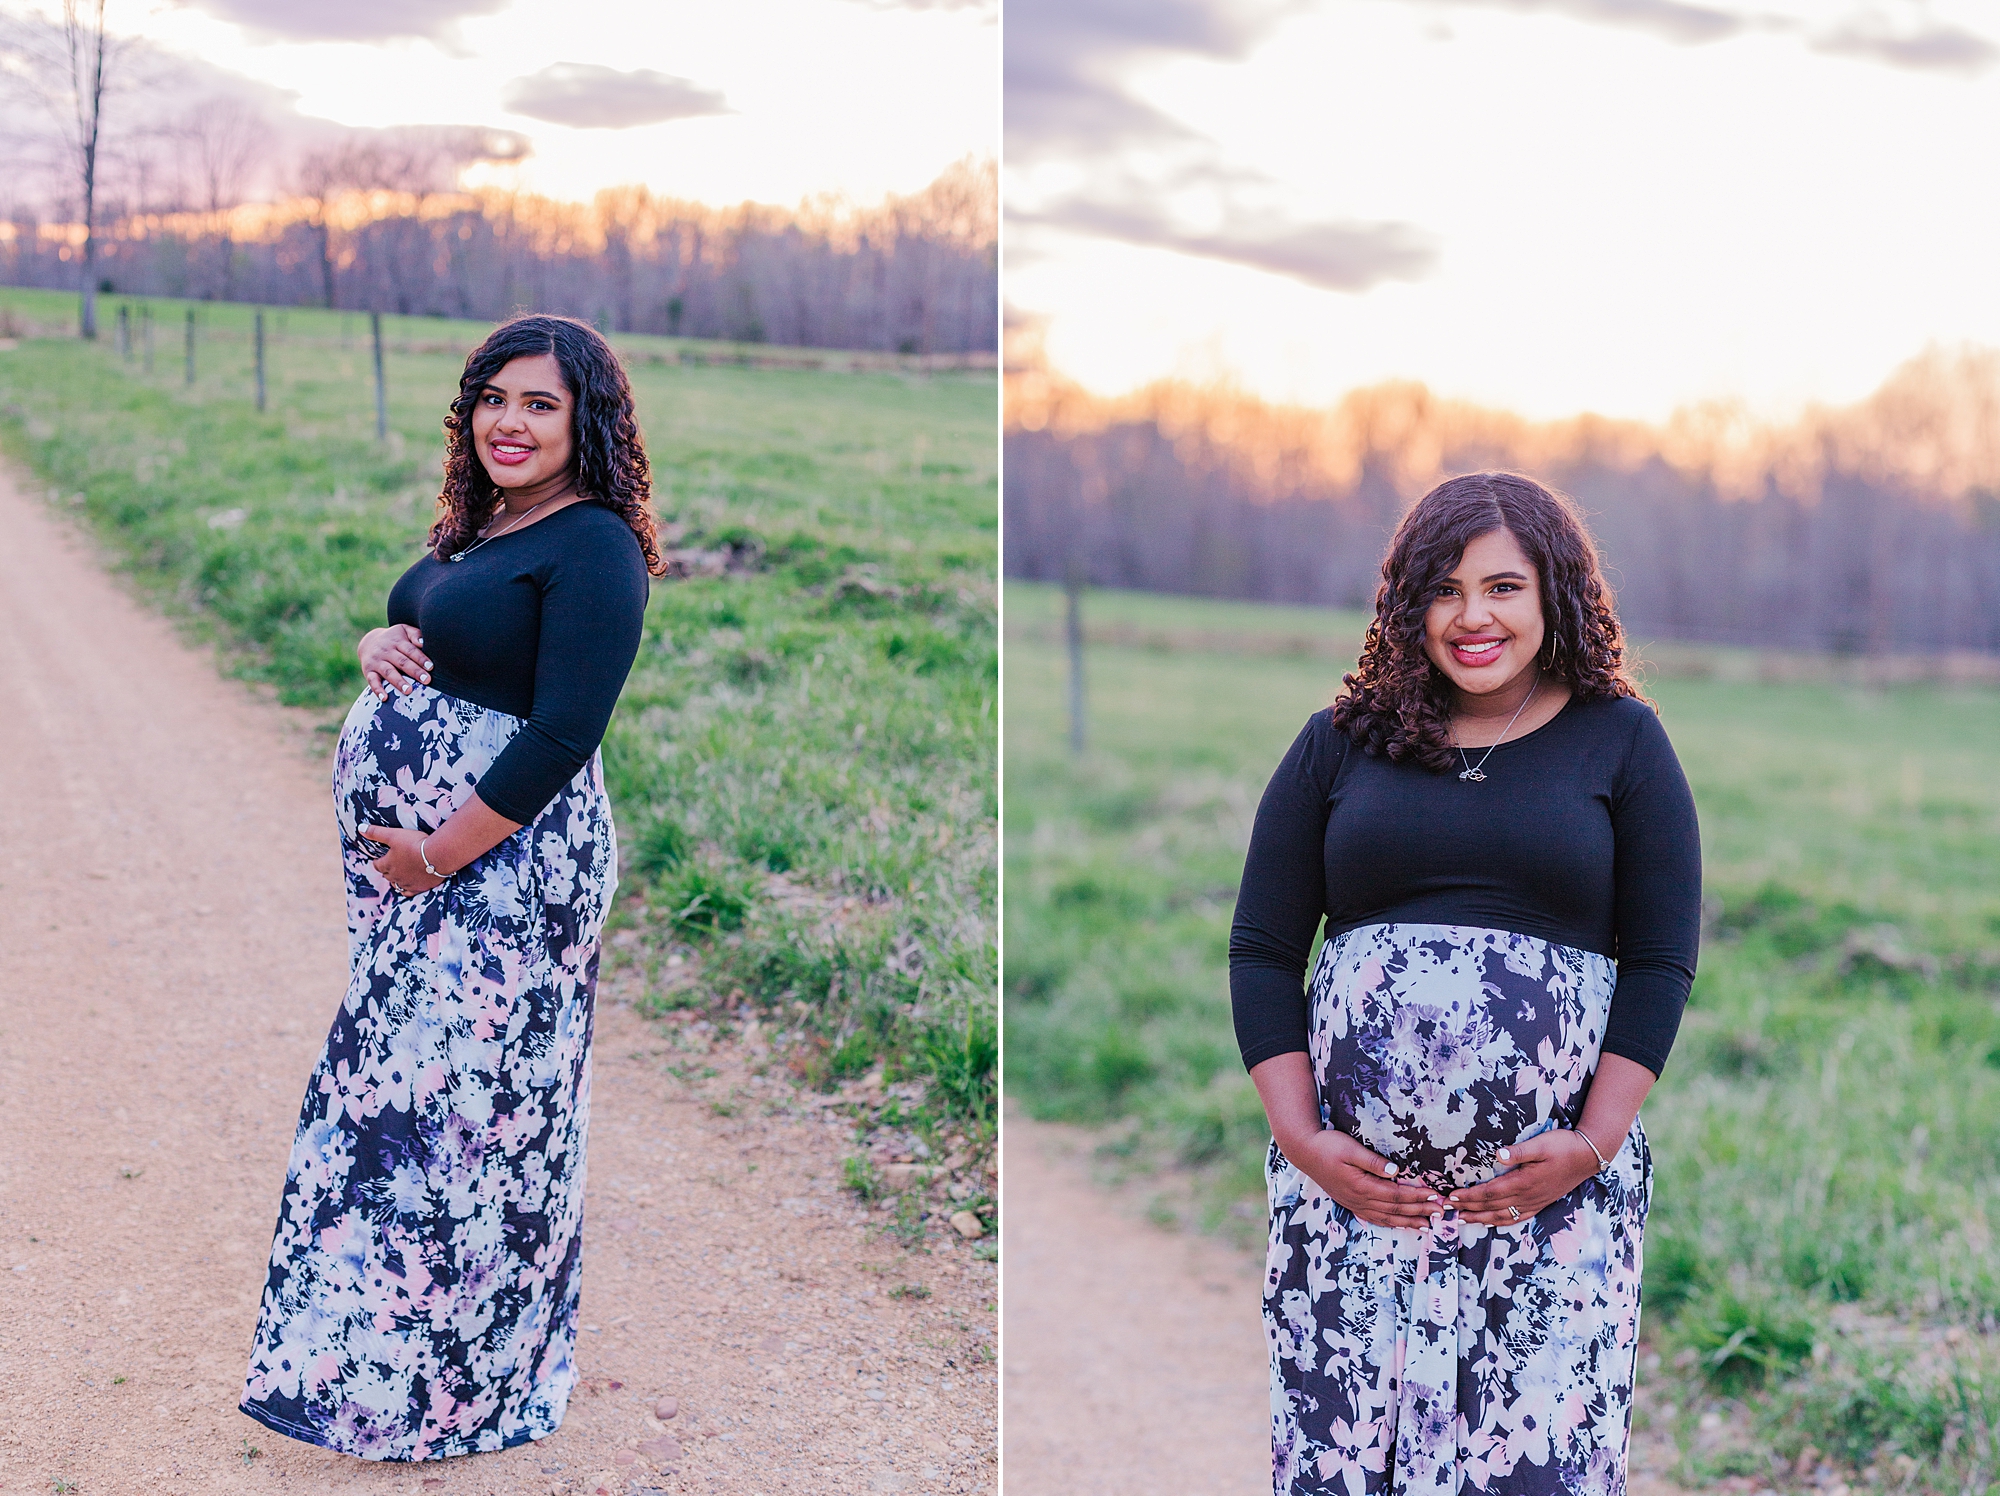  sunset maternity session along country road in Lyles TN